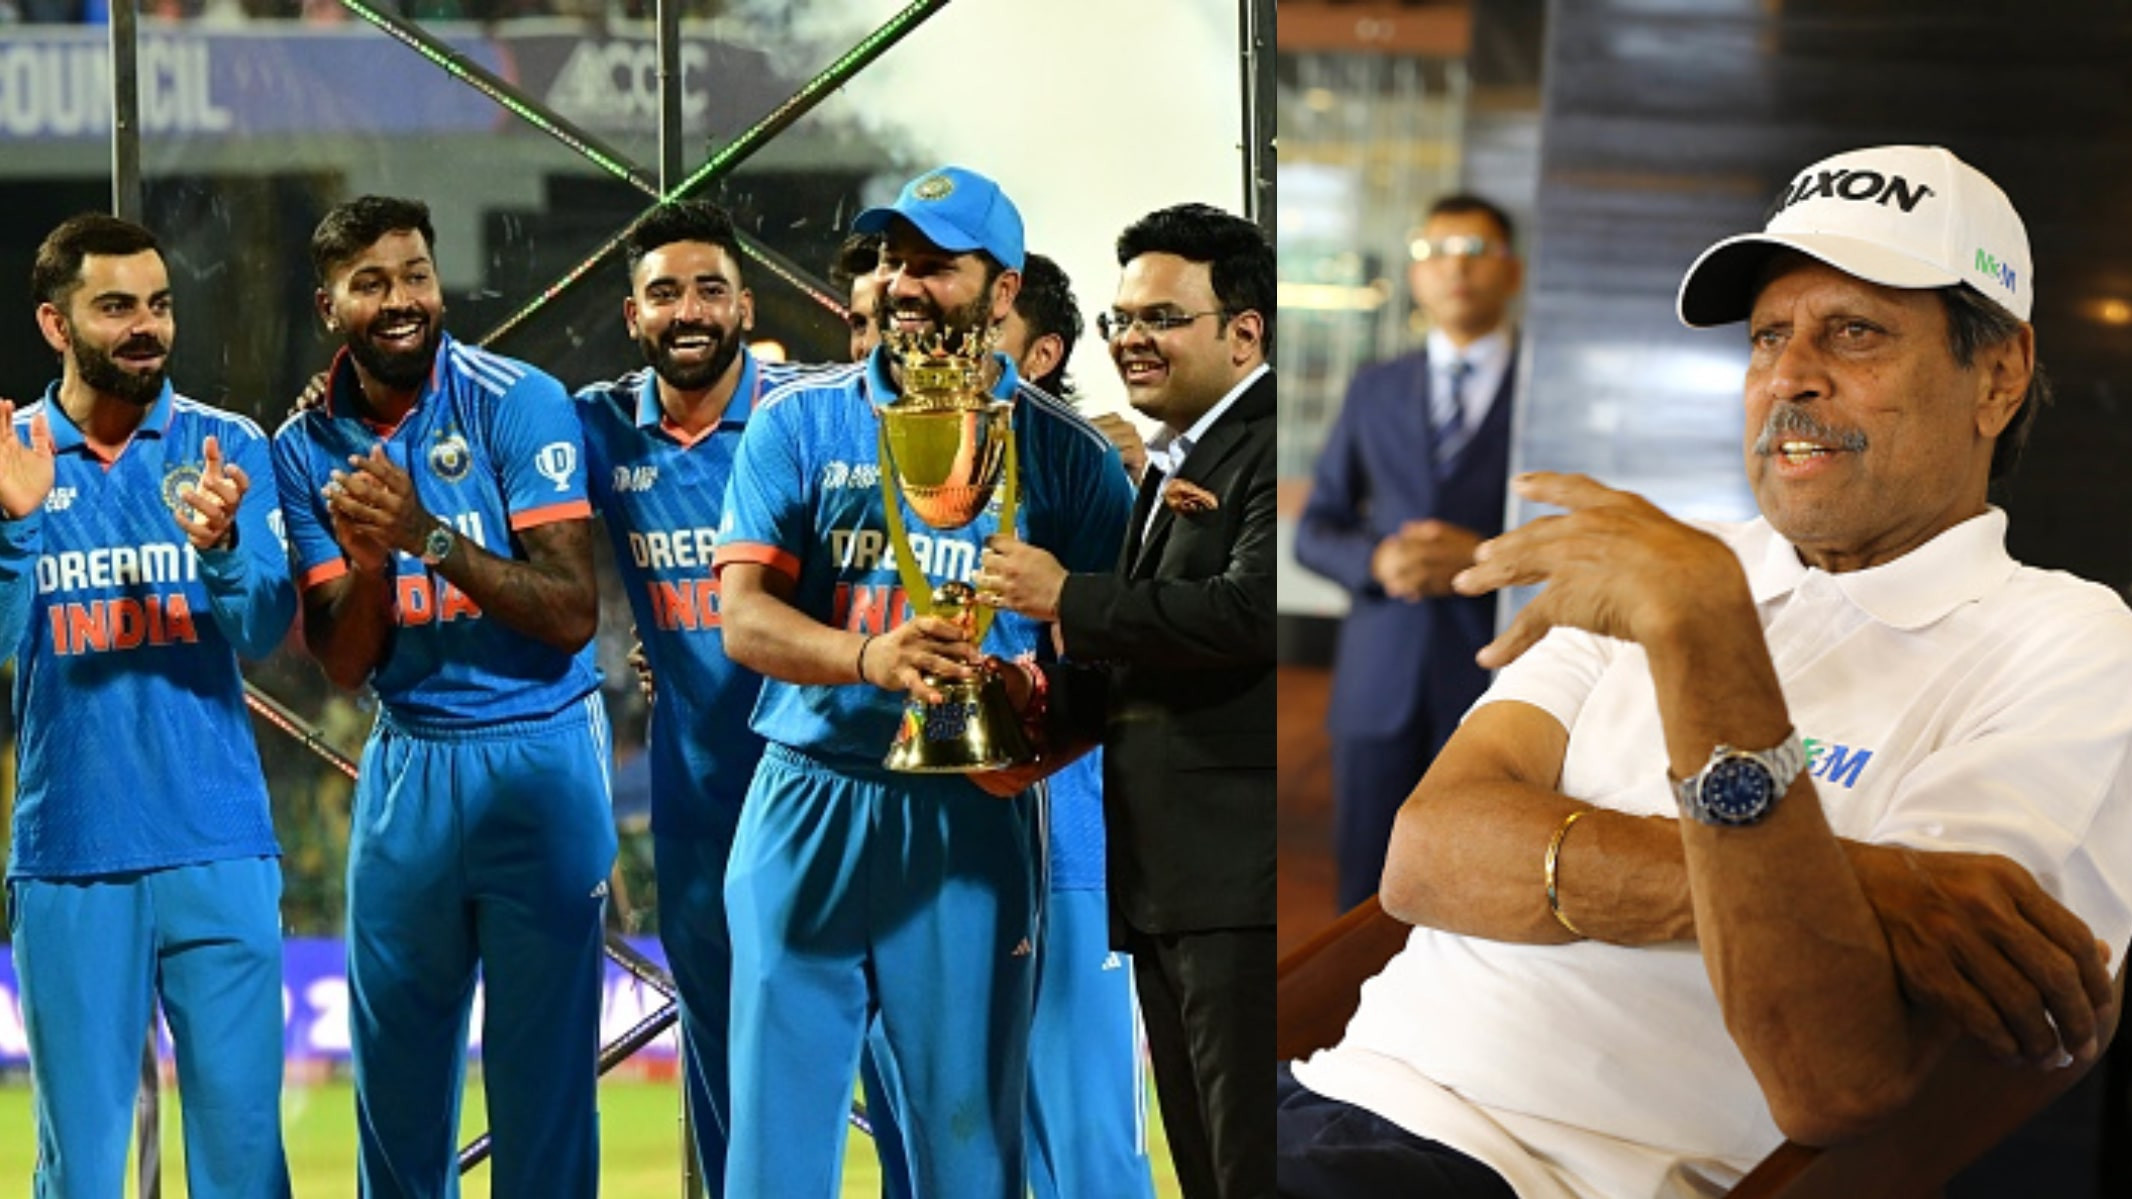 CWC 2023: “India is ready to win championships”- Kapil Dev on Men in Blue's chances in World Cup 2023